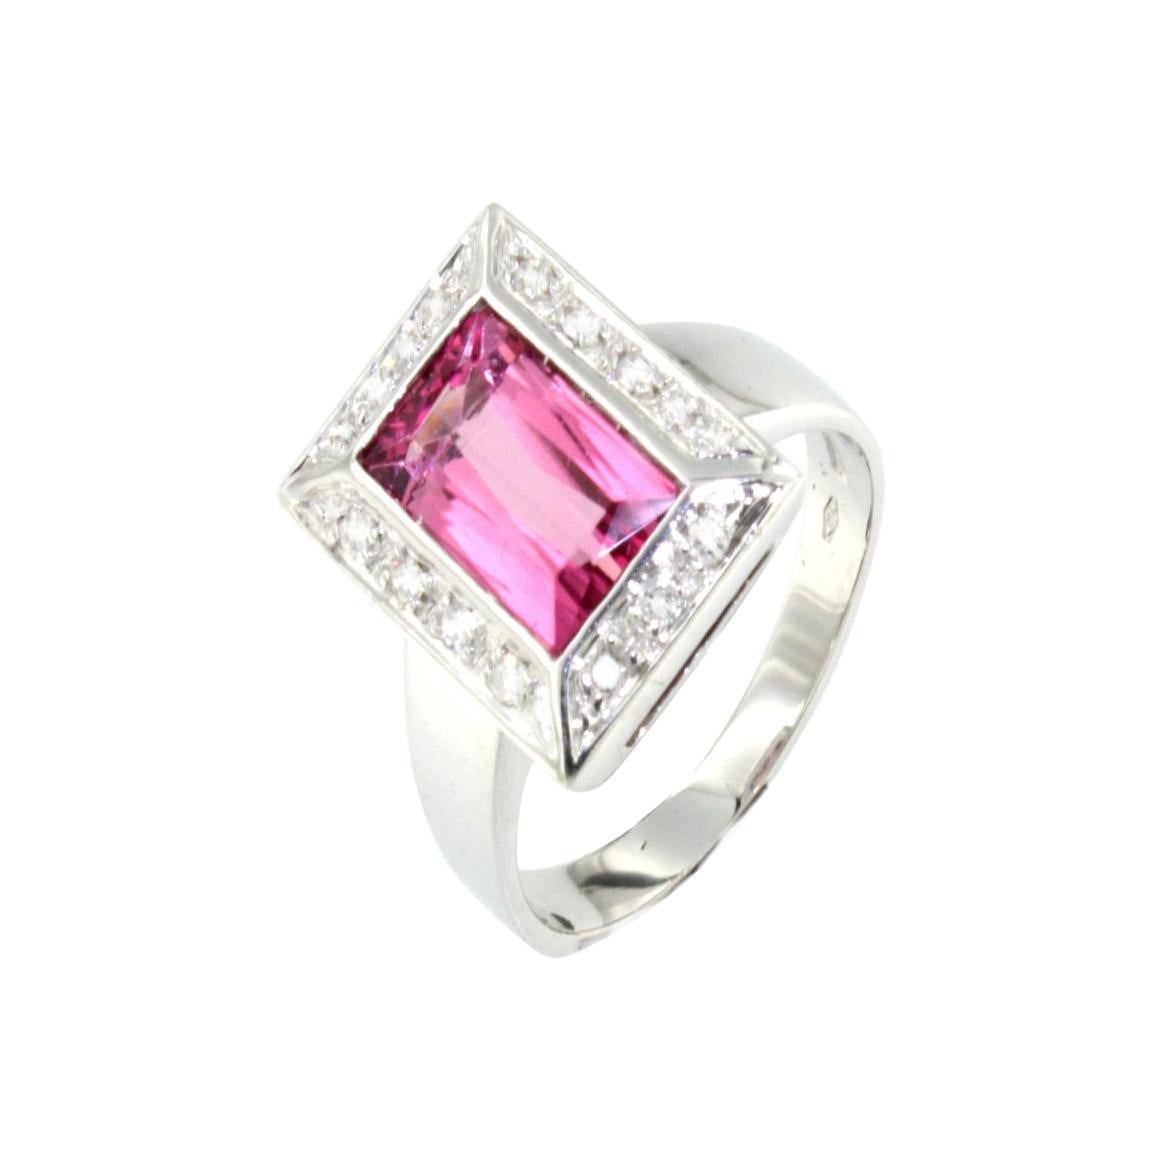 18kt White Gold with Pink Tourmaline and White Diamonds Ring